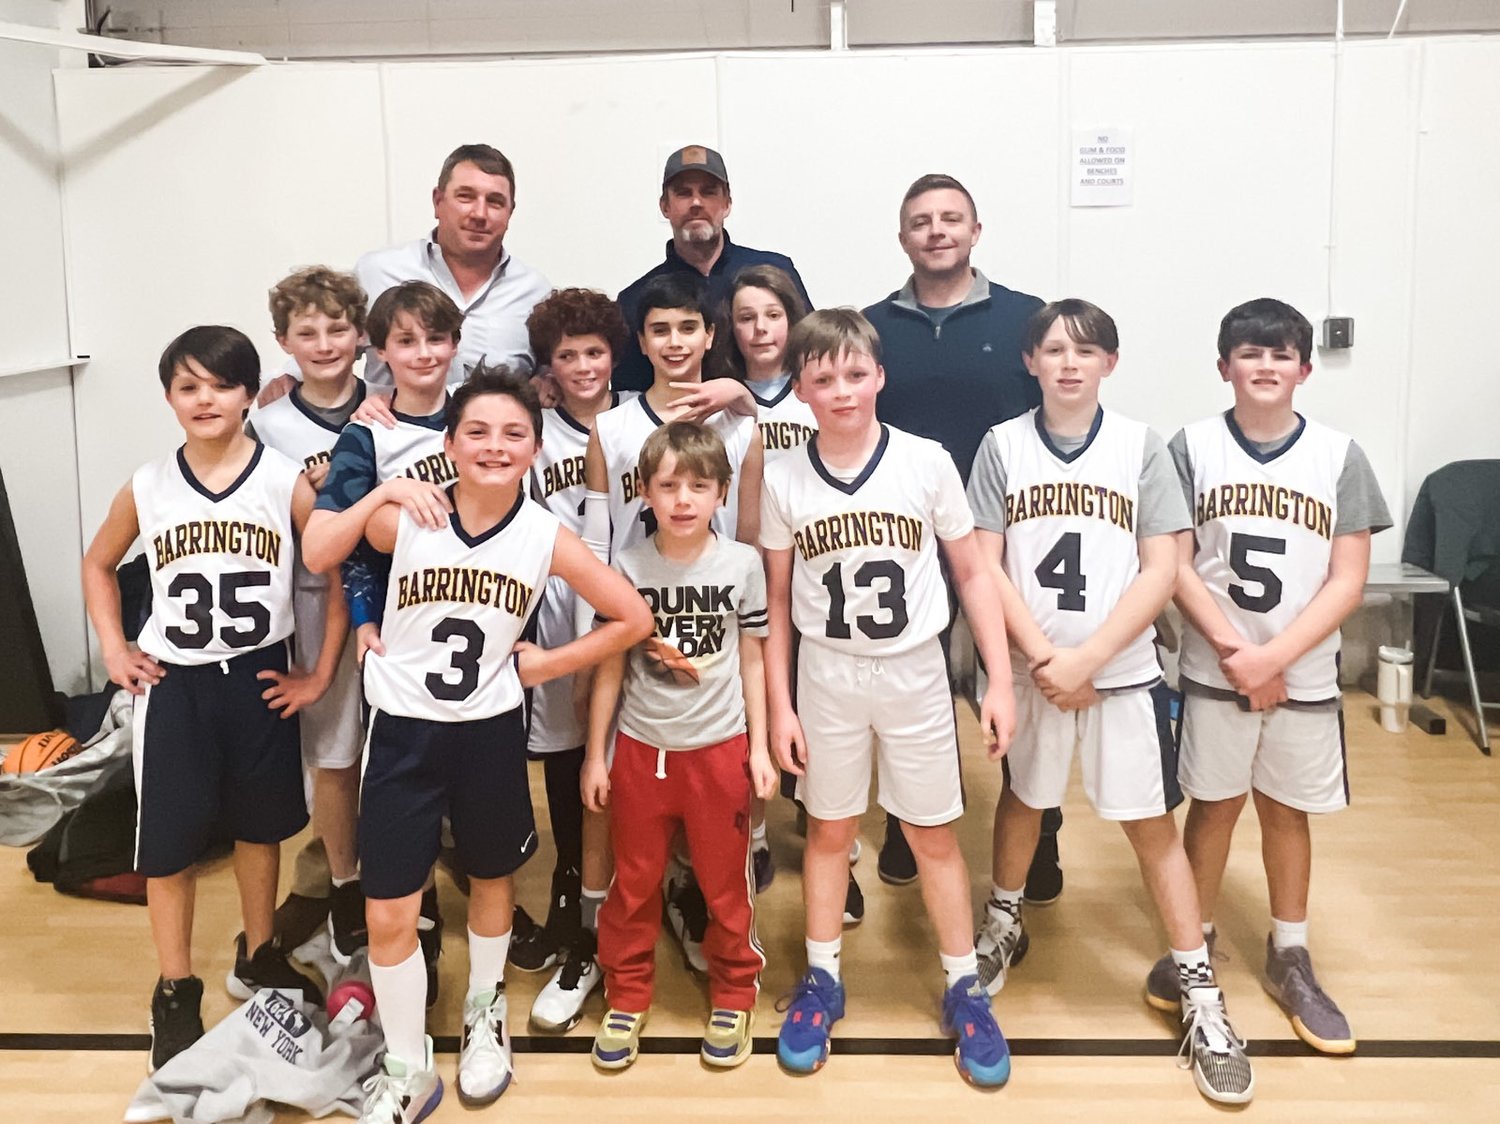 Members of the Barrington fifth grade boys Gold team reached the finals, losing to a team from Everett, Mass.